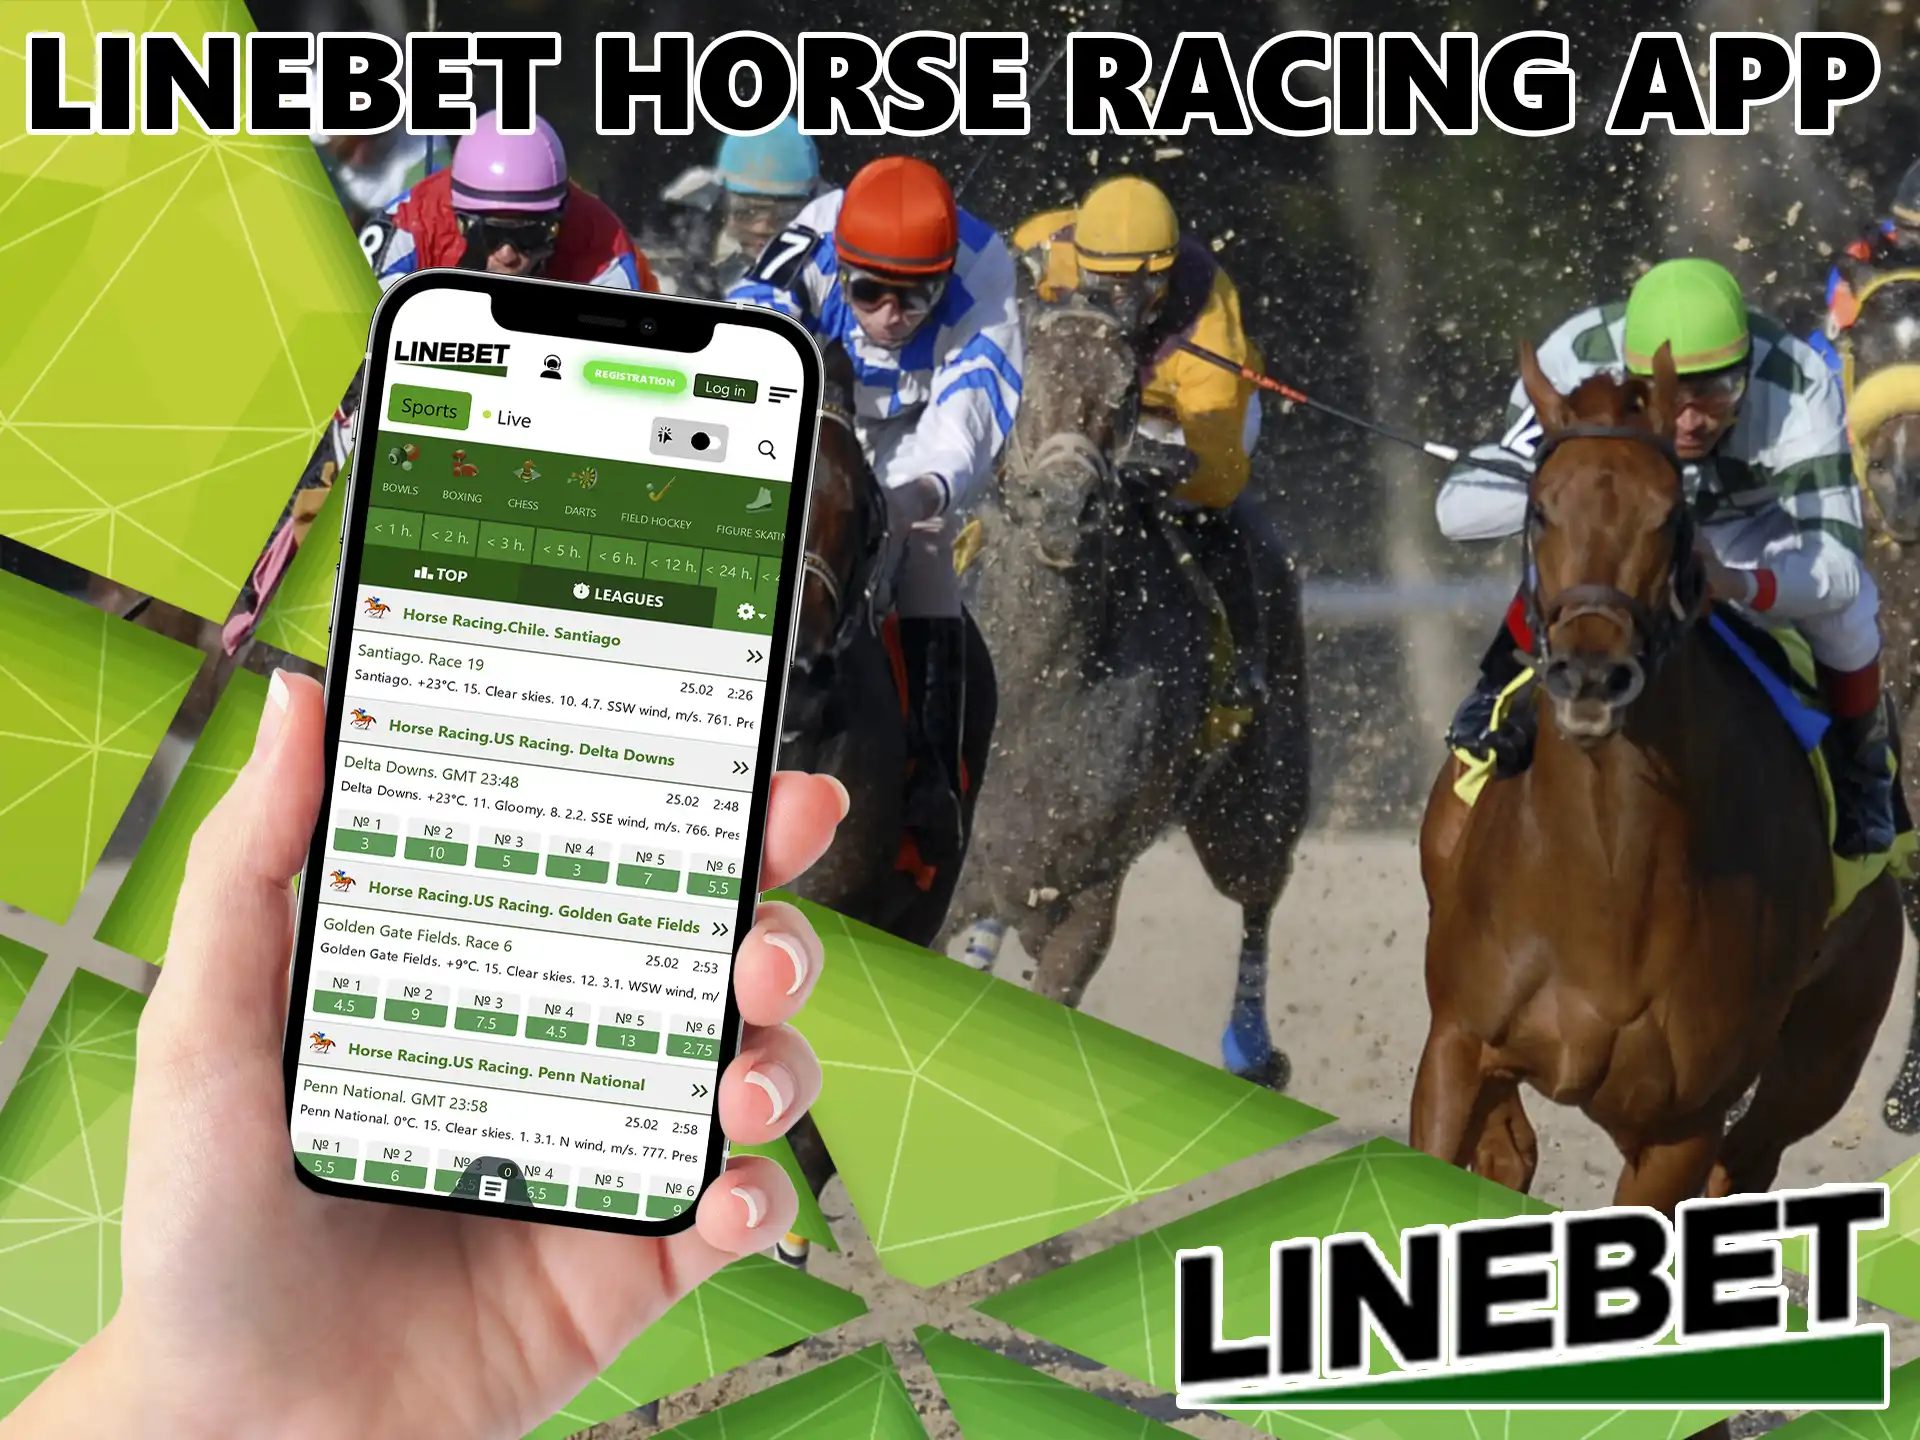 Indian users have the opportunity to earn real money by betting on the sport in the user-friendly interface of Linebet's absolutely free software.